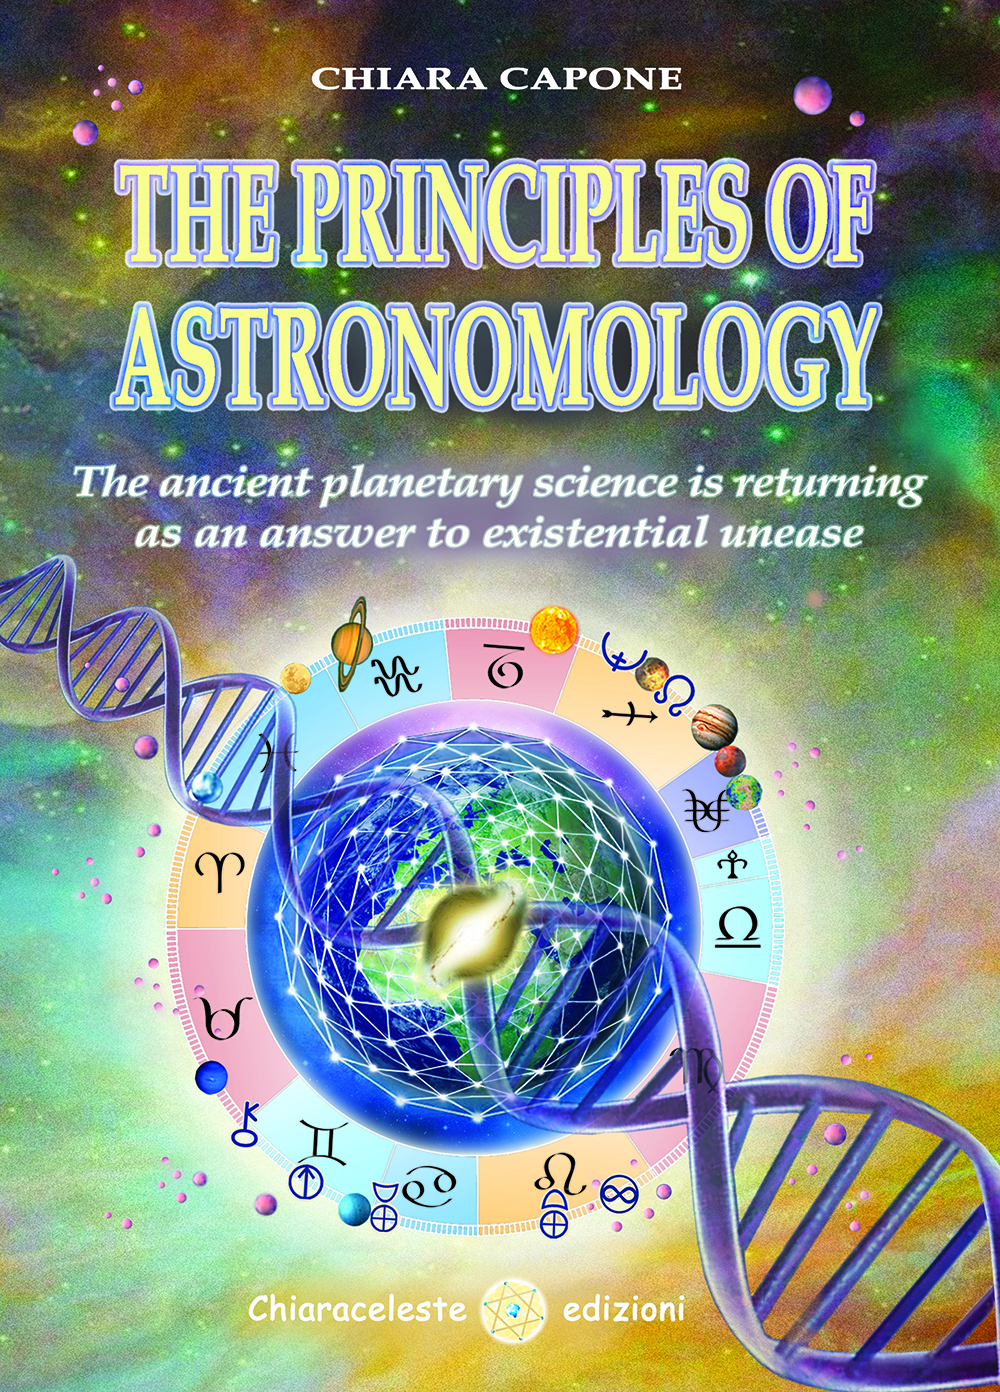 THE PRINCIPLES OF ASTRONOMOLOGY  -  The ancient planetary science is returning as an answer to existential unease